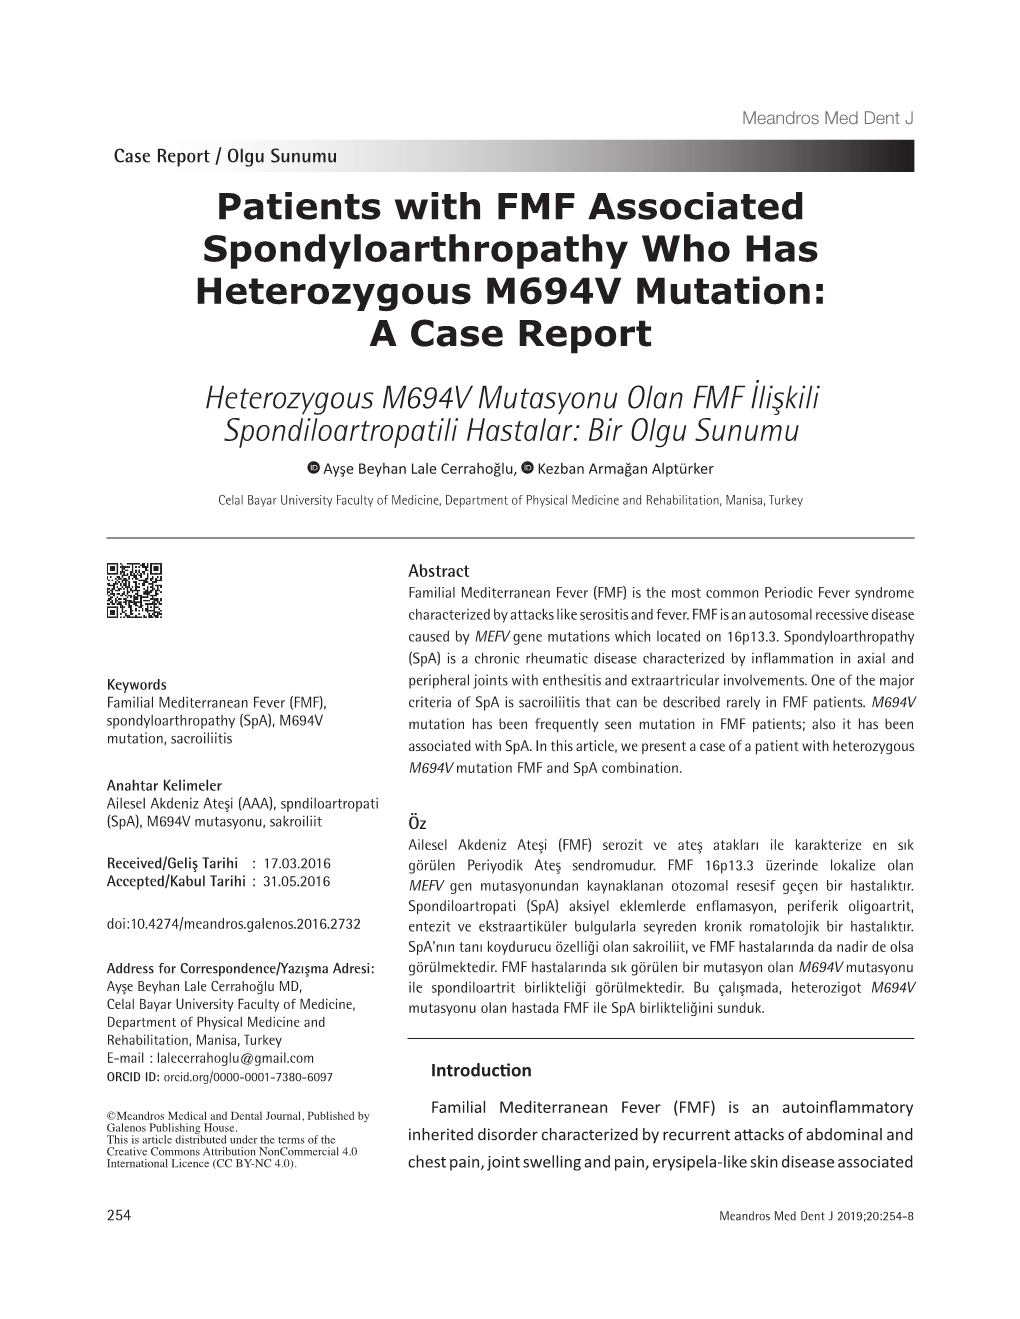 Patients with FMF Associated Spondyloarthropathy Who Has